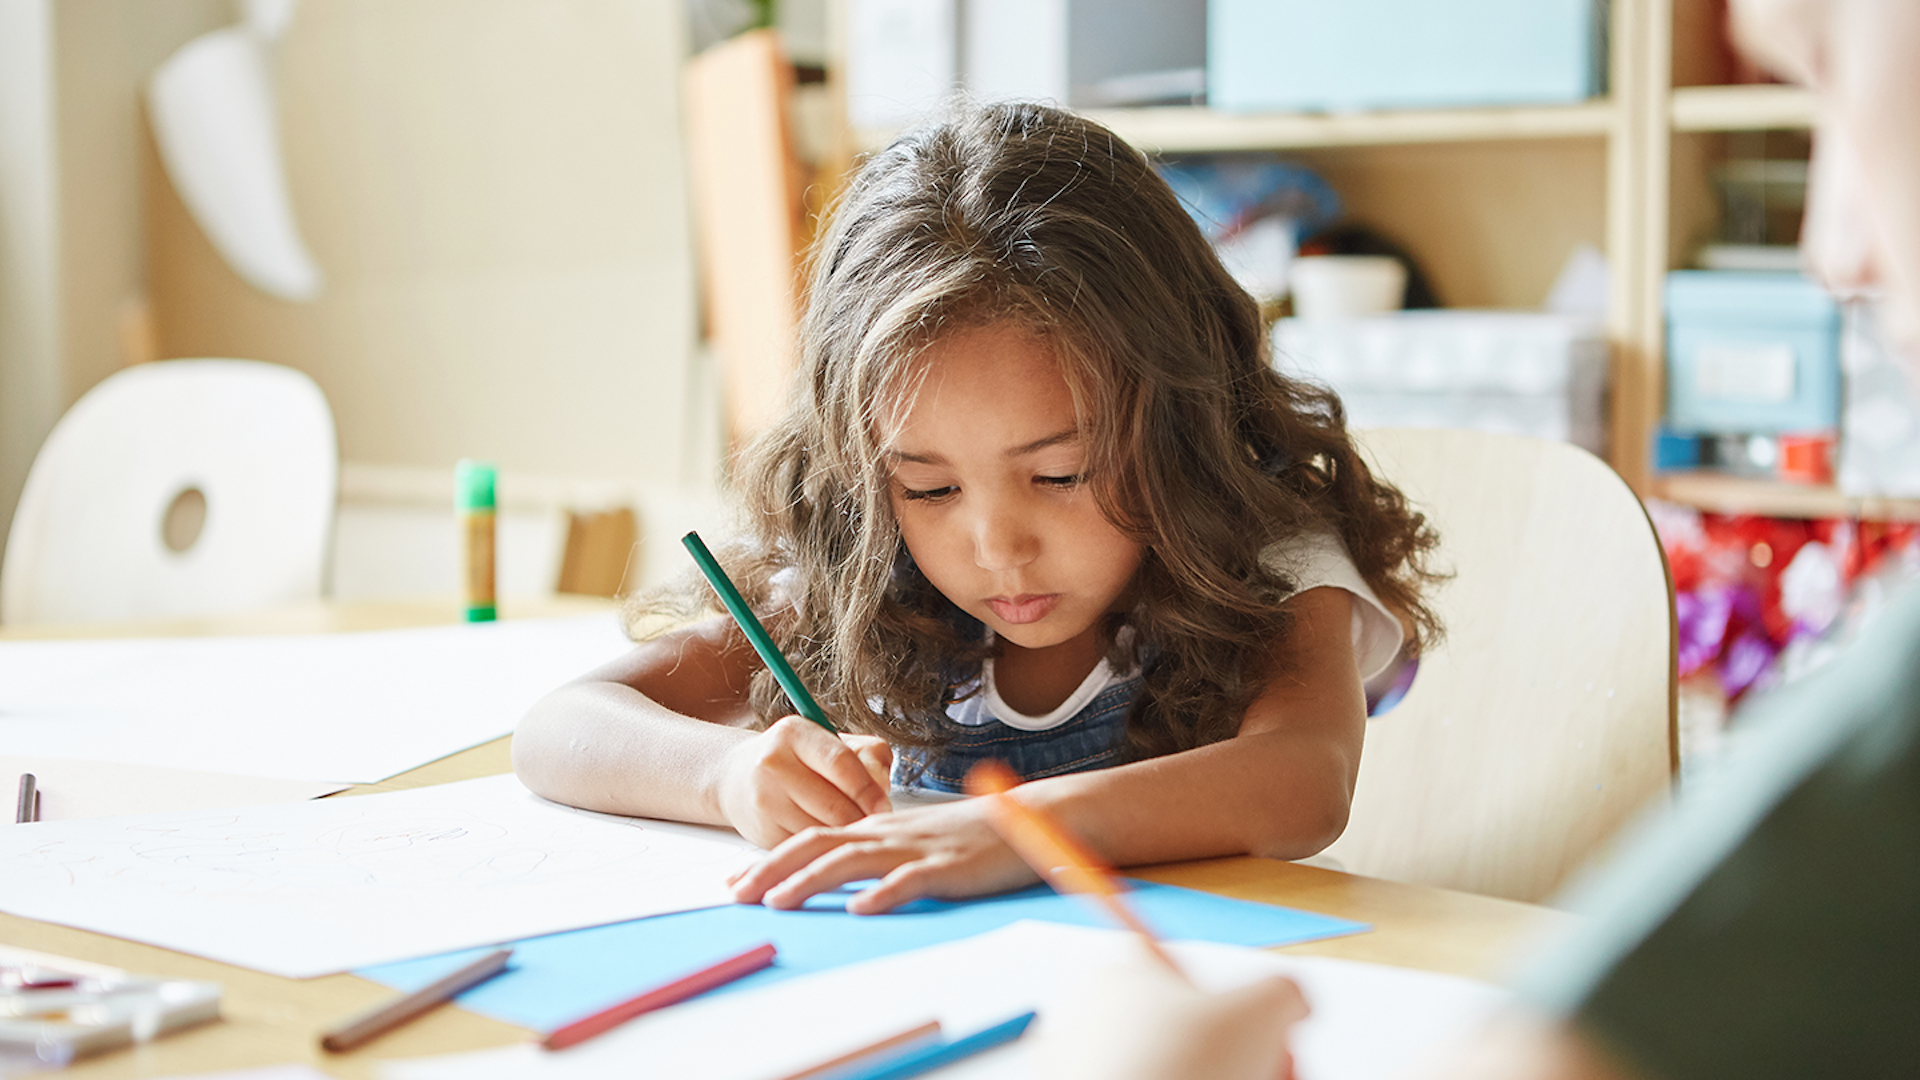 photo of a young girl drawing at her desk